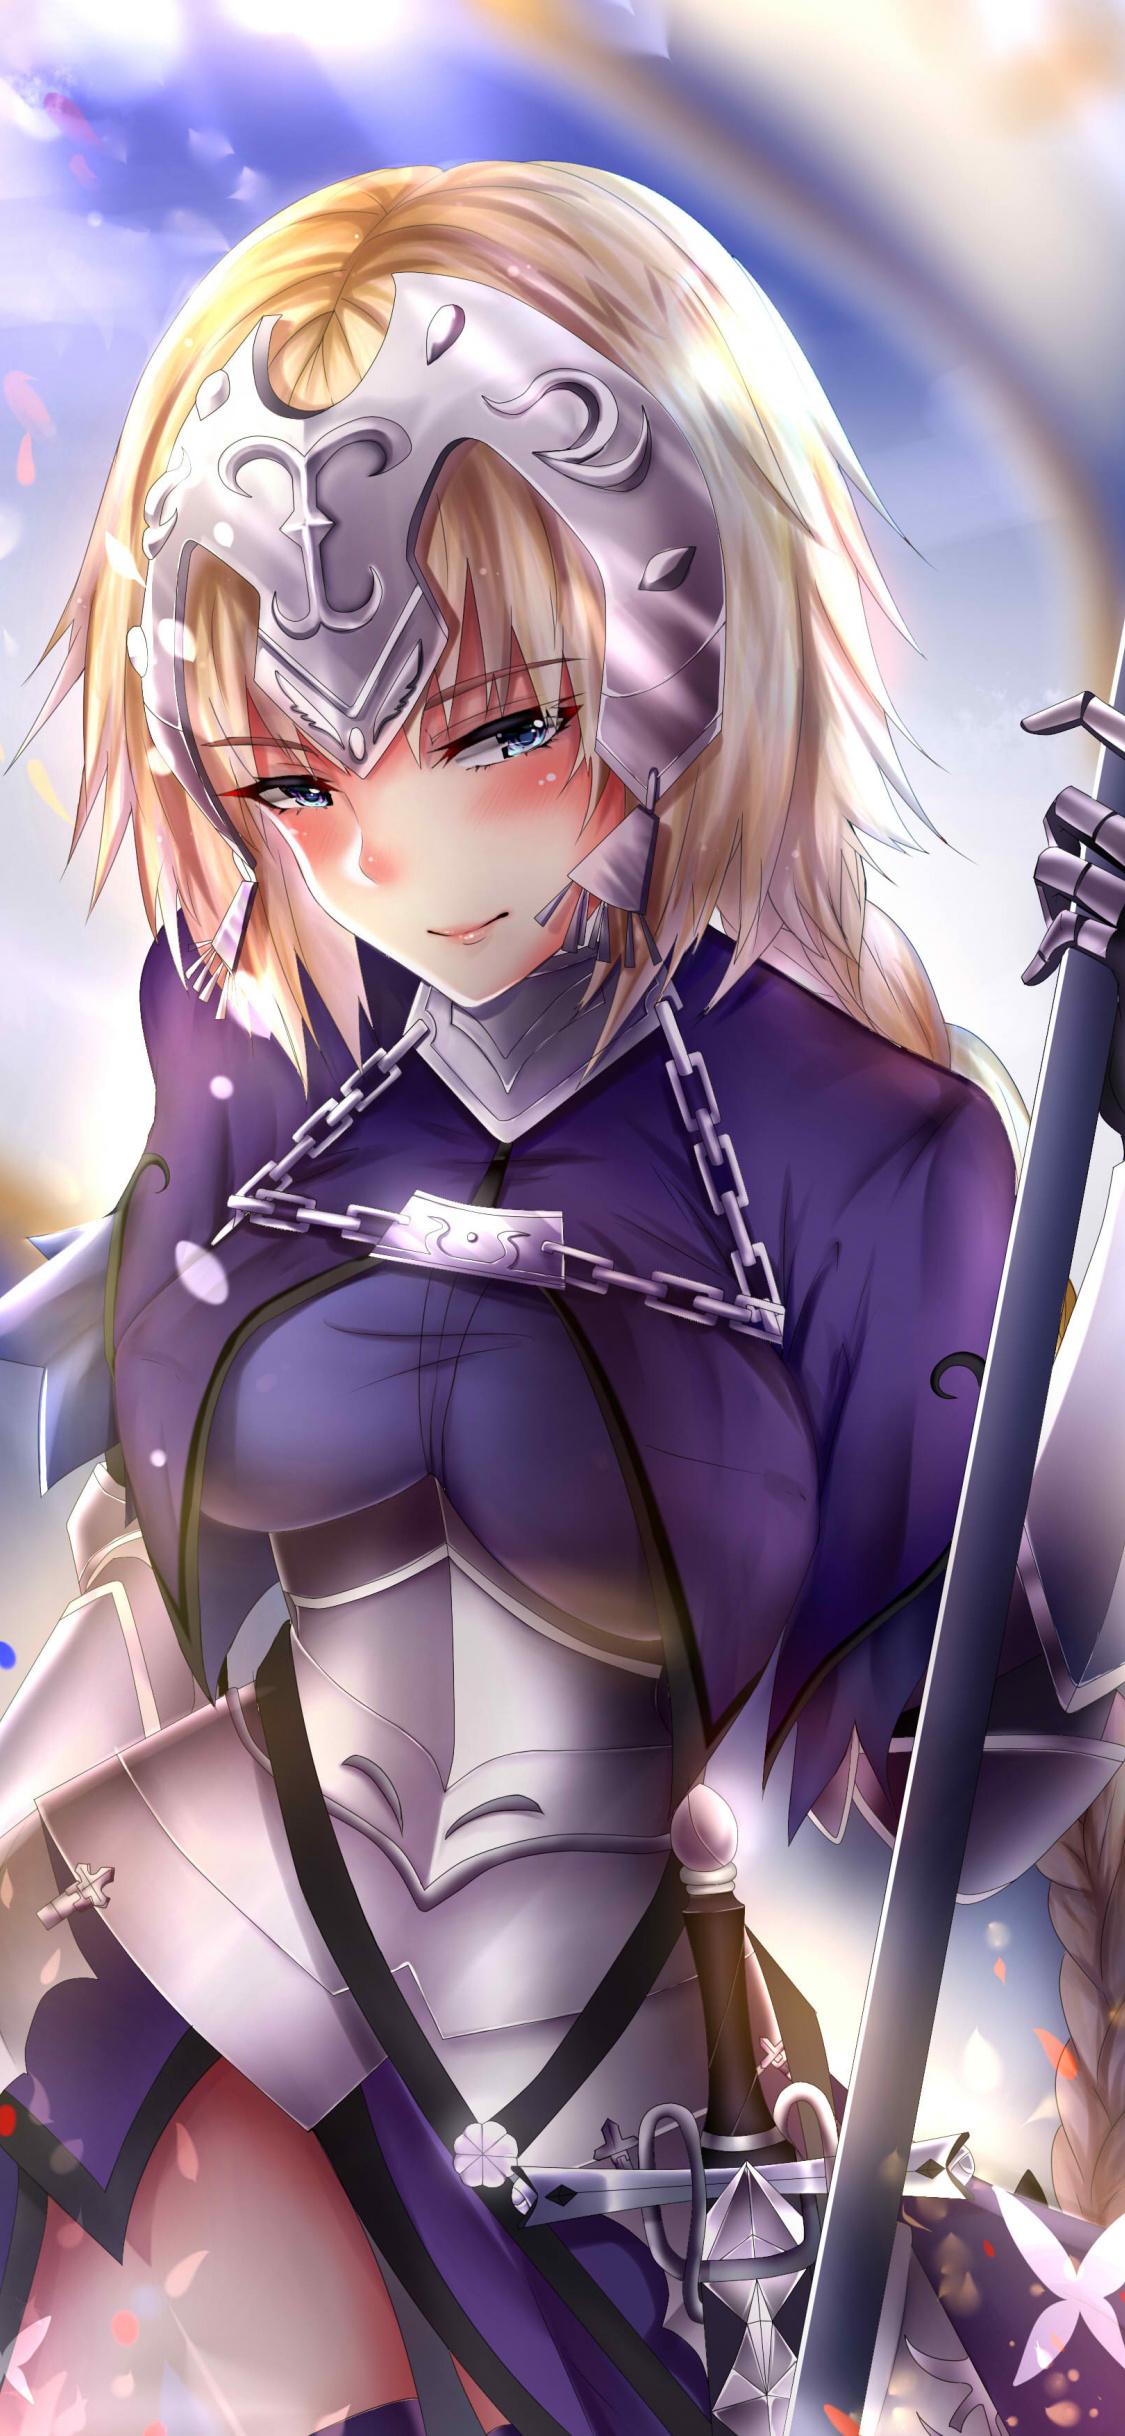 Download 1125x2436 Wallpaper Beautiful, Jeanne D'arc, Fate Stay Night, Iphone X 1125x2436 HD Image, Background, 3233